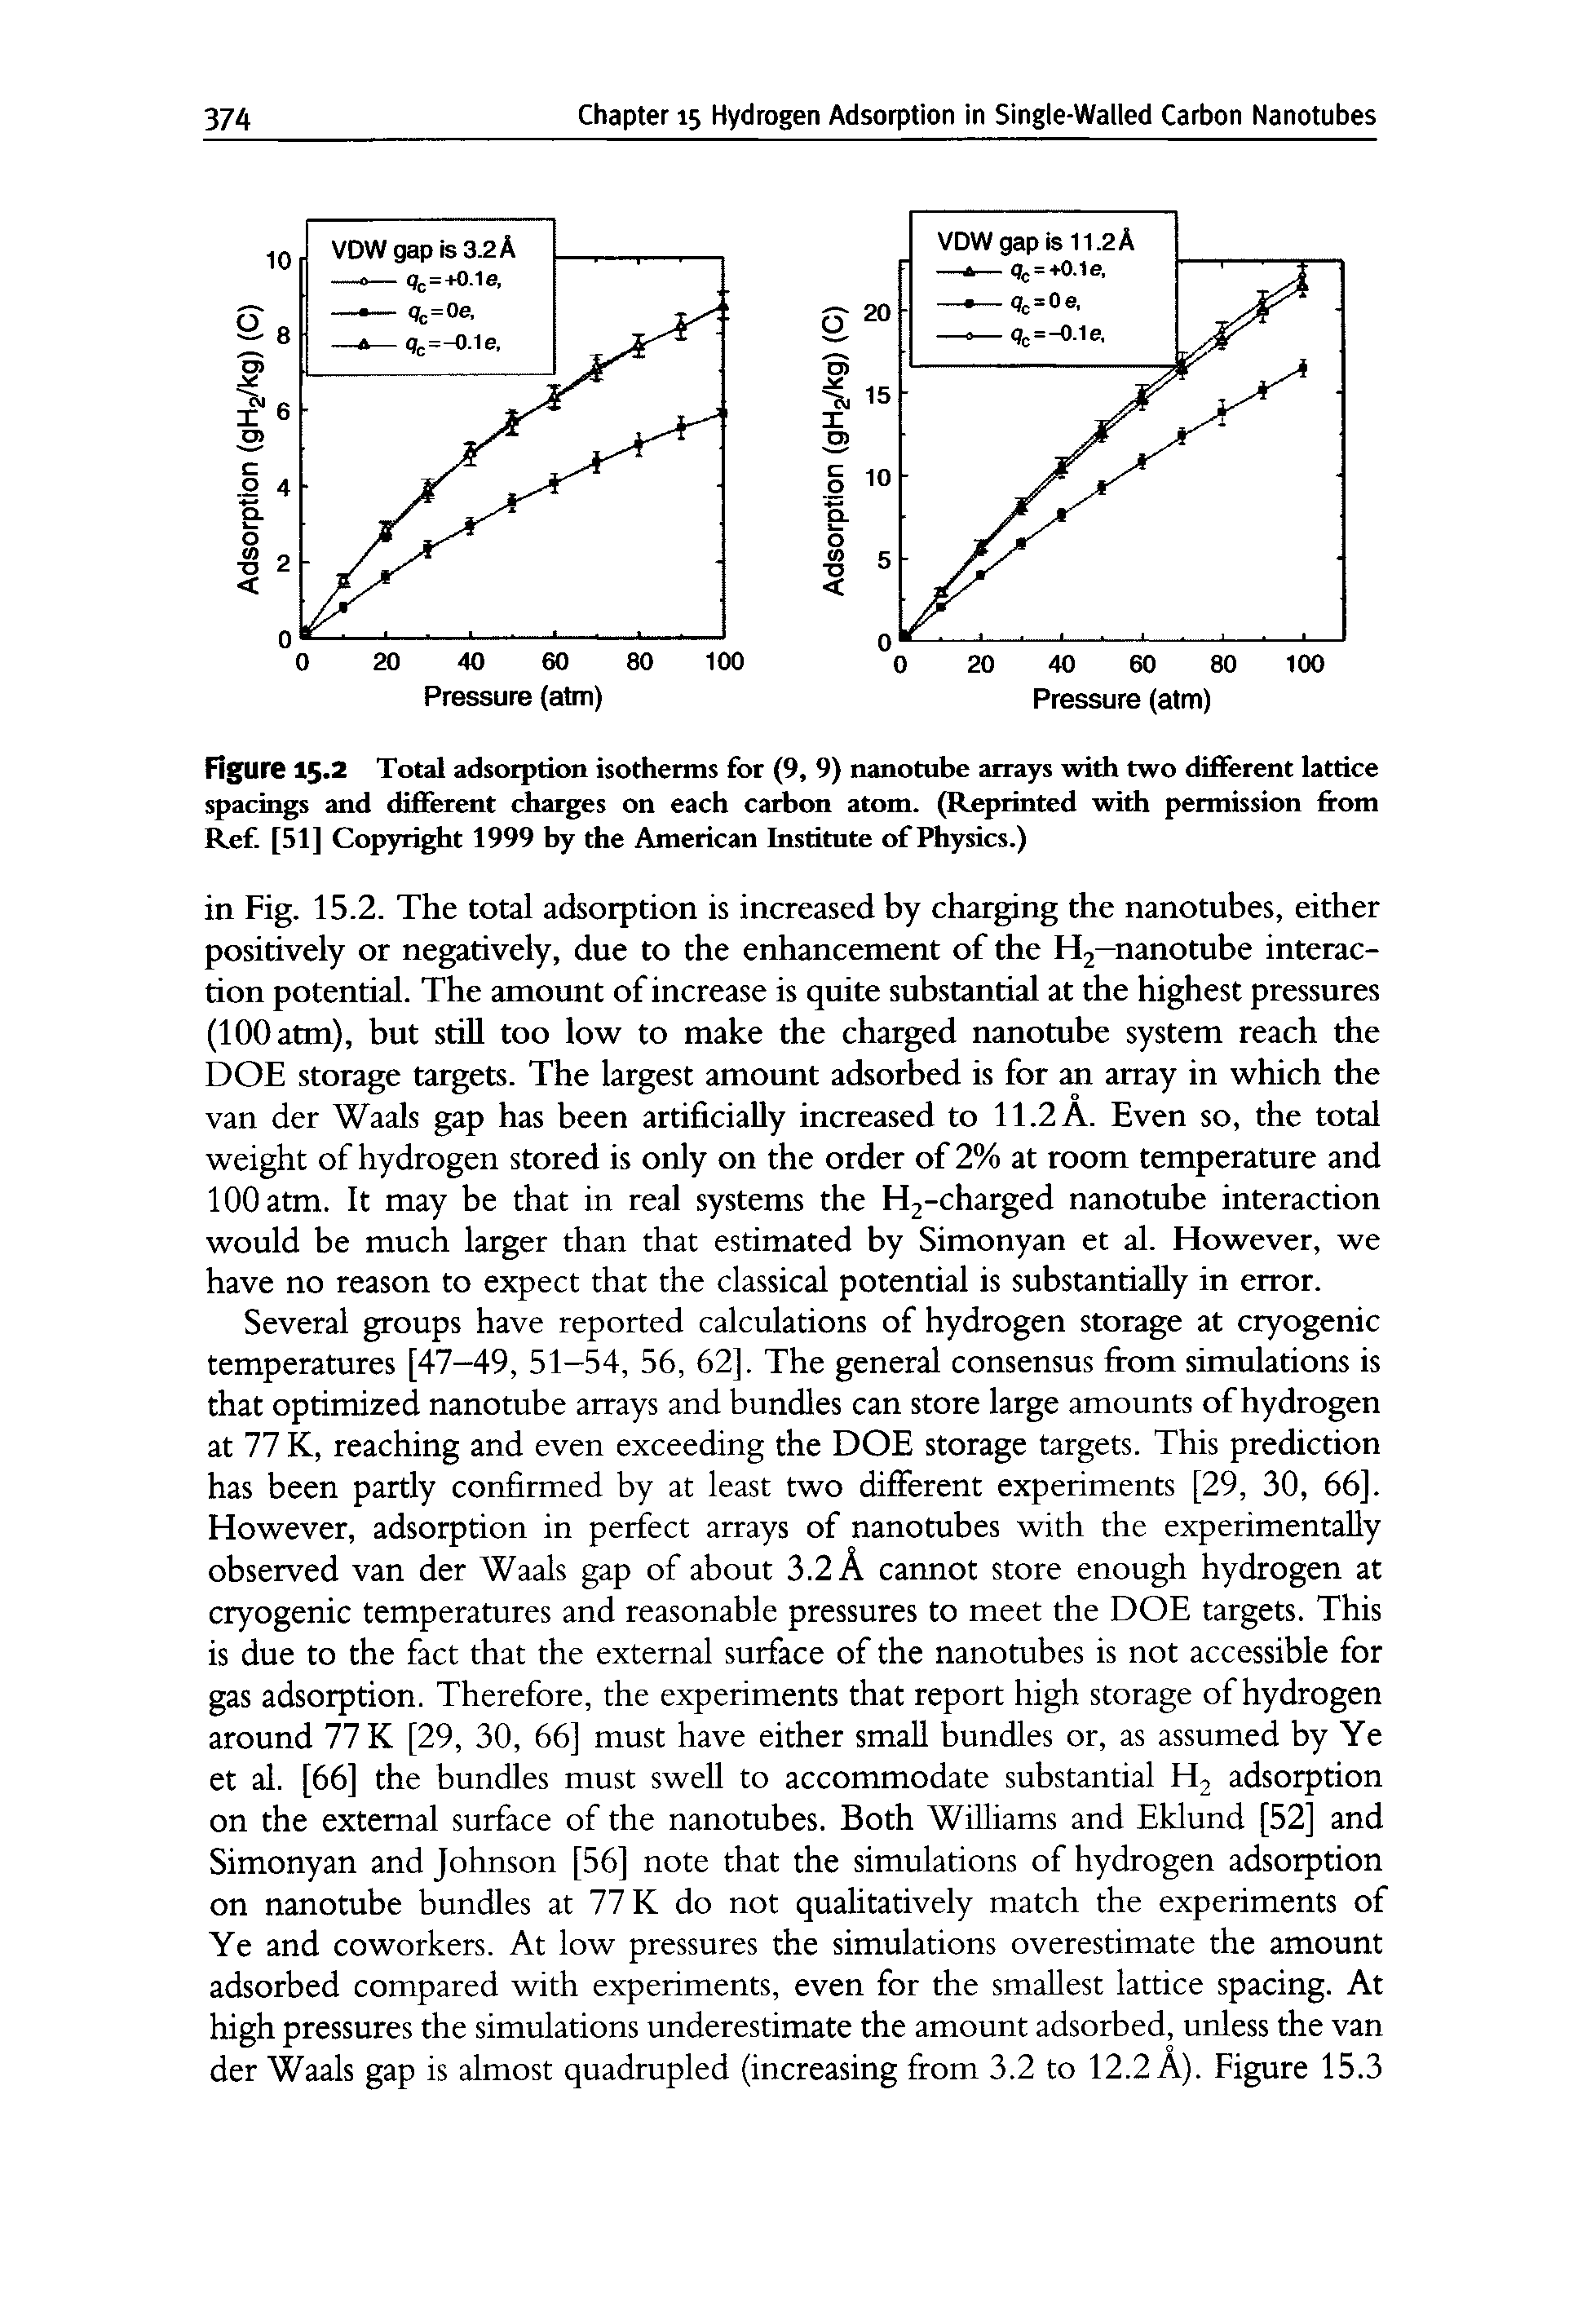 Figure 15.2 Total adsorption isotherms for (9, 9) nanotube arrays with two different lattice spacings and diEFerent charges on each carbon atom. (Reprinted with permission from Ref. [51] Copyright 1999 by the American Institute of Physics.)...